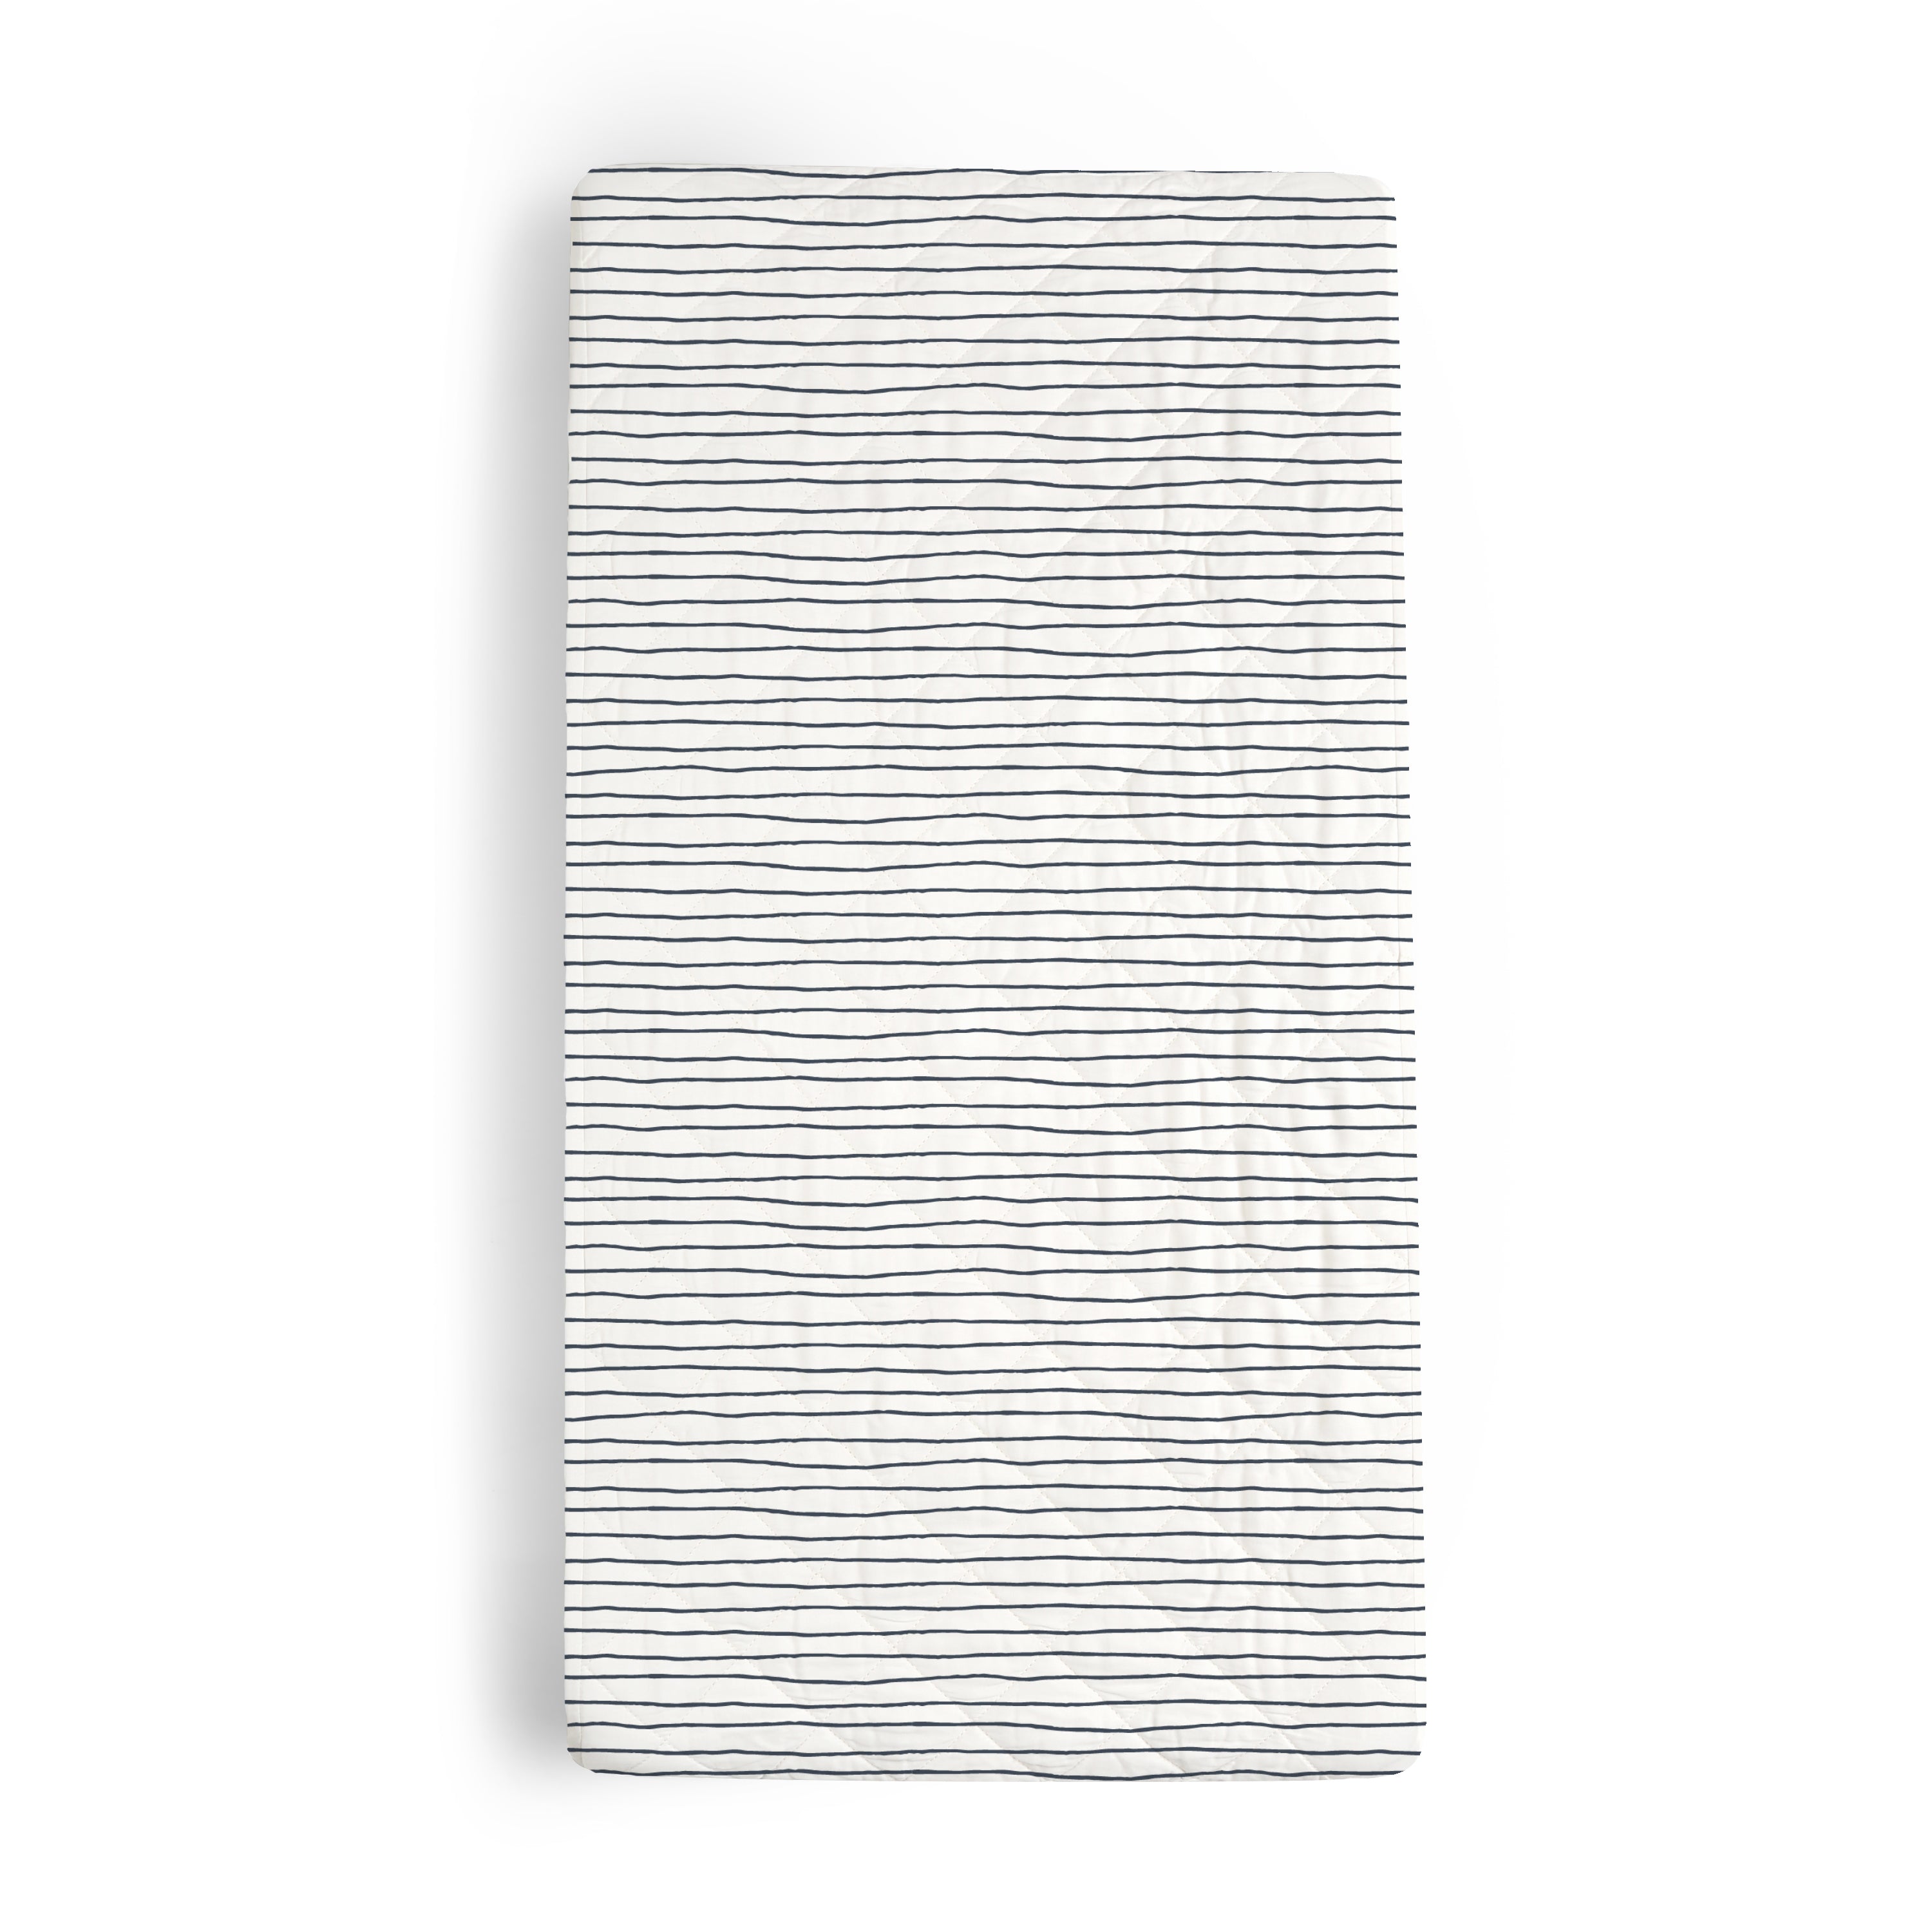 White folded towel with black horizontal stripes on a plain background. 
Product Name: Makemake Organics Organic Cotton Changing Pad Cover - Navy Stripes